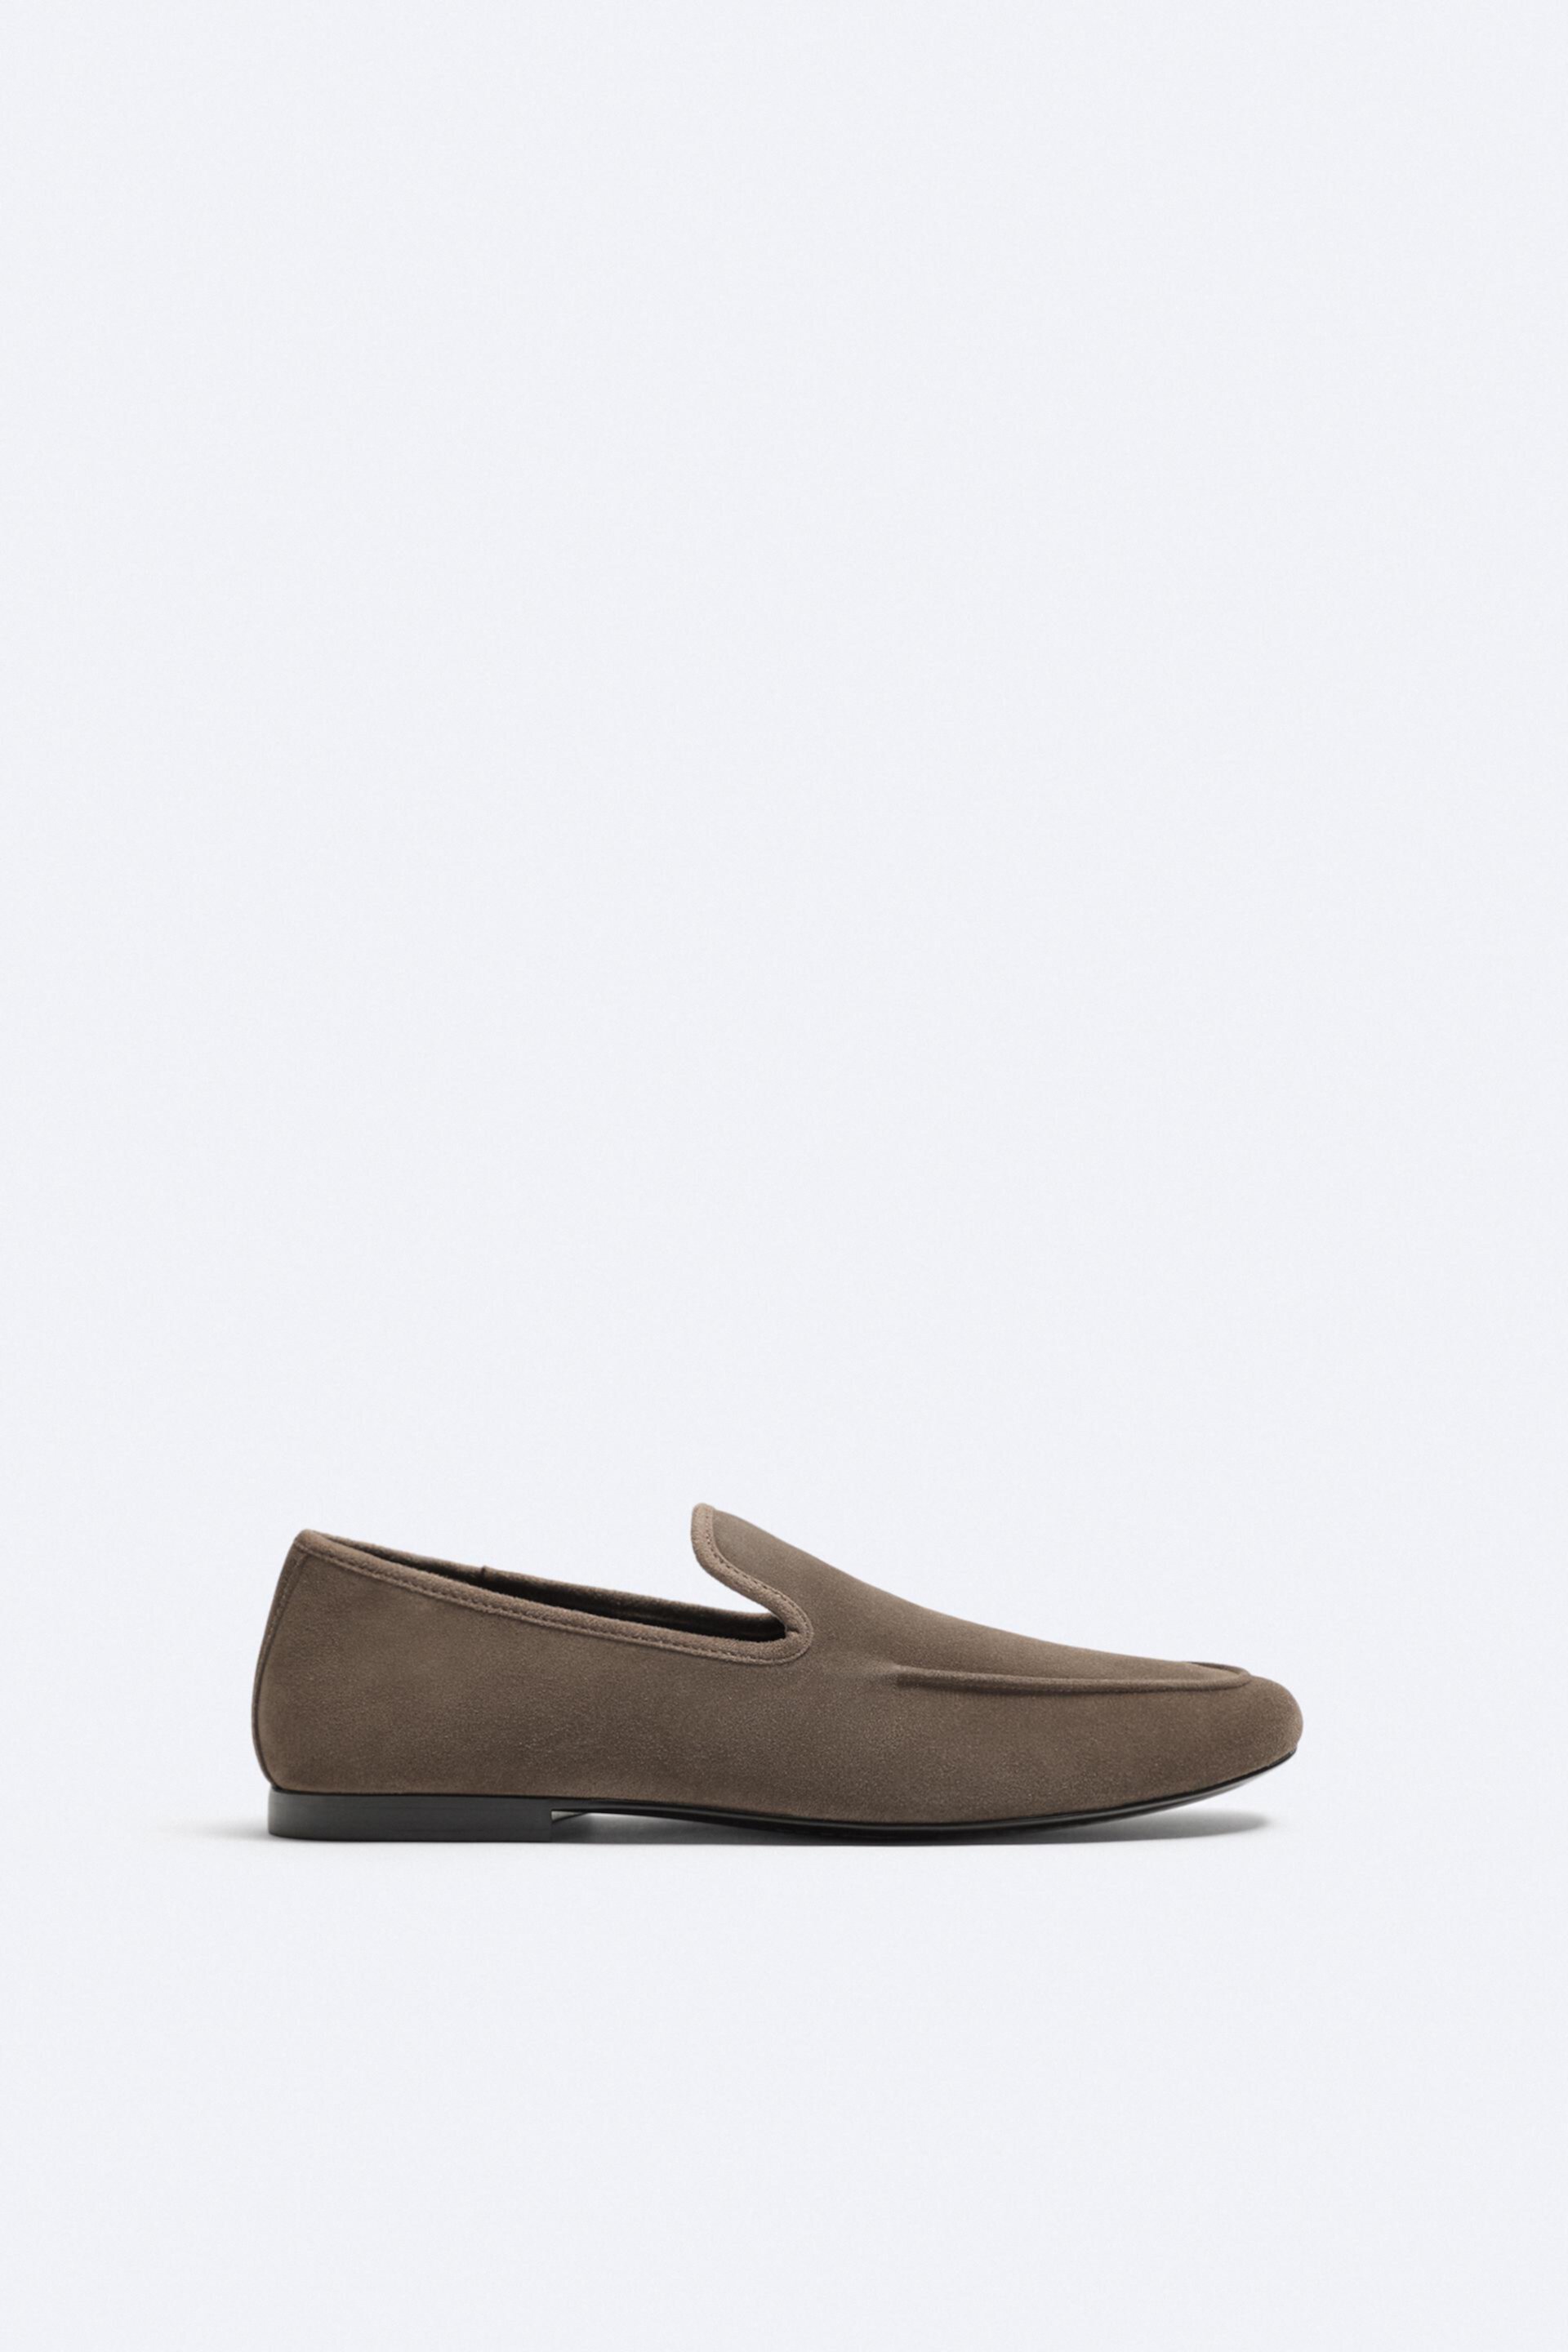 SUEDE LOAFERS ZARA